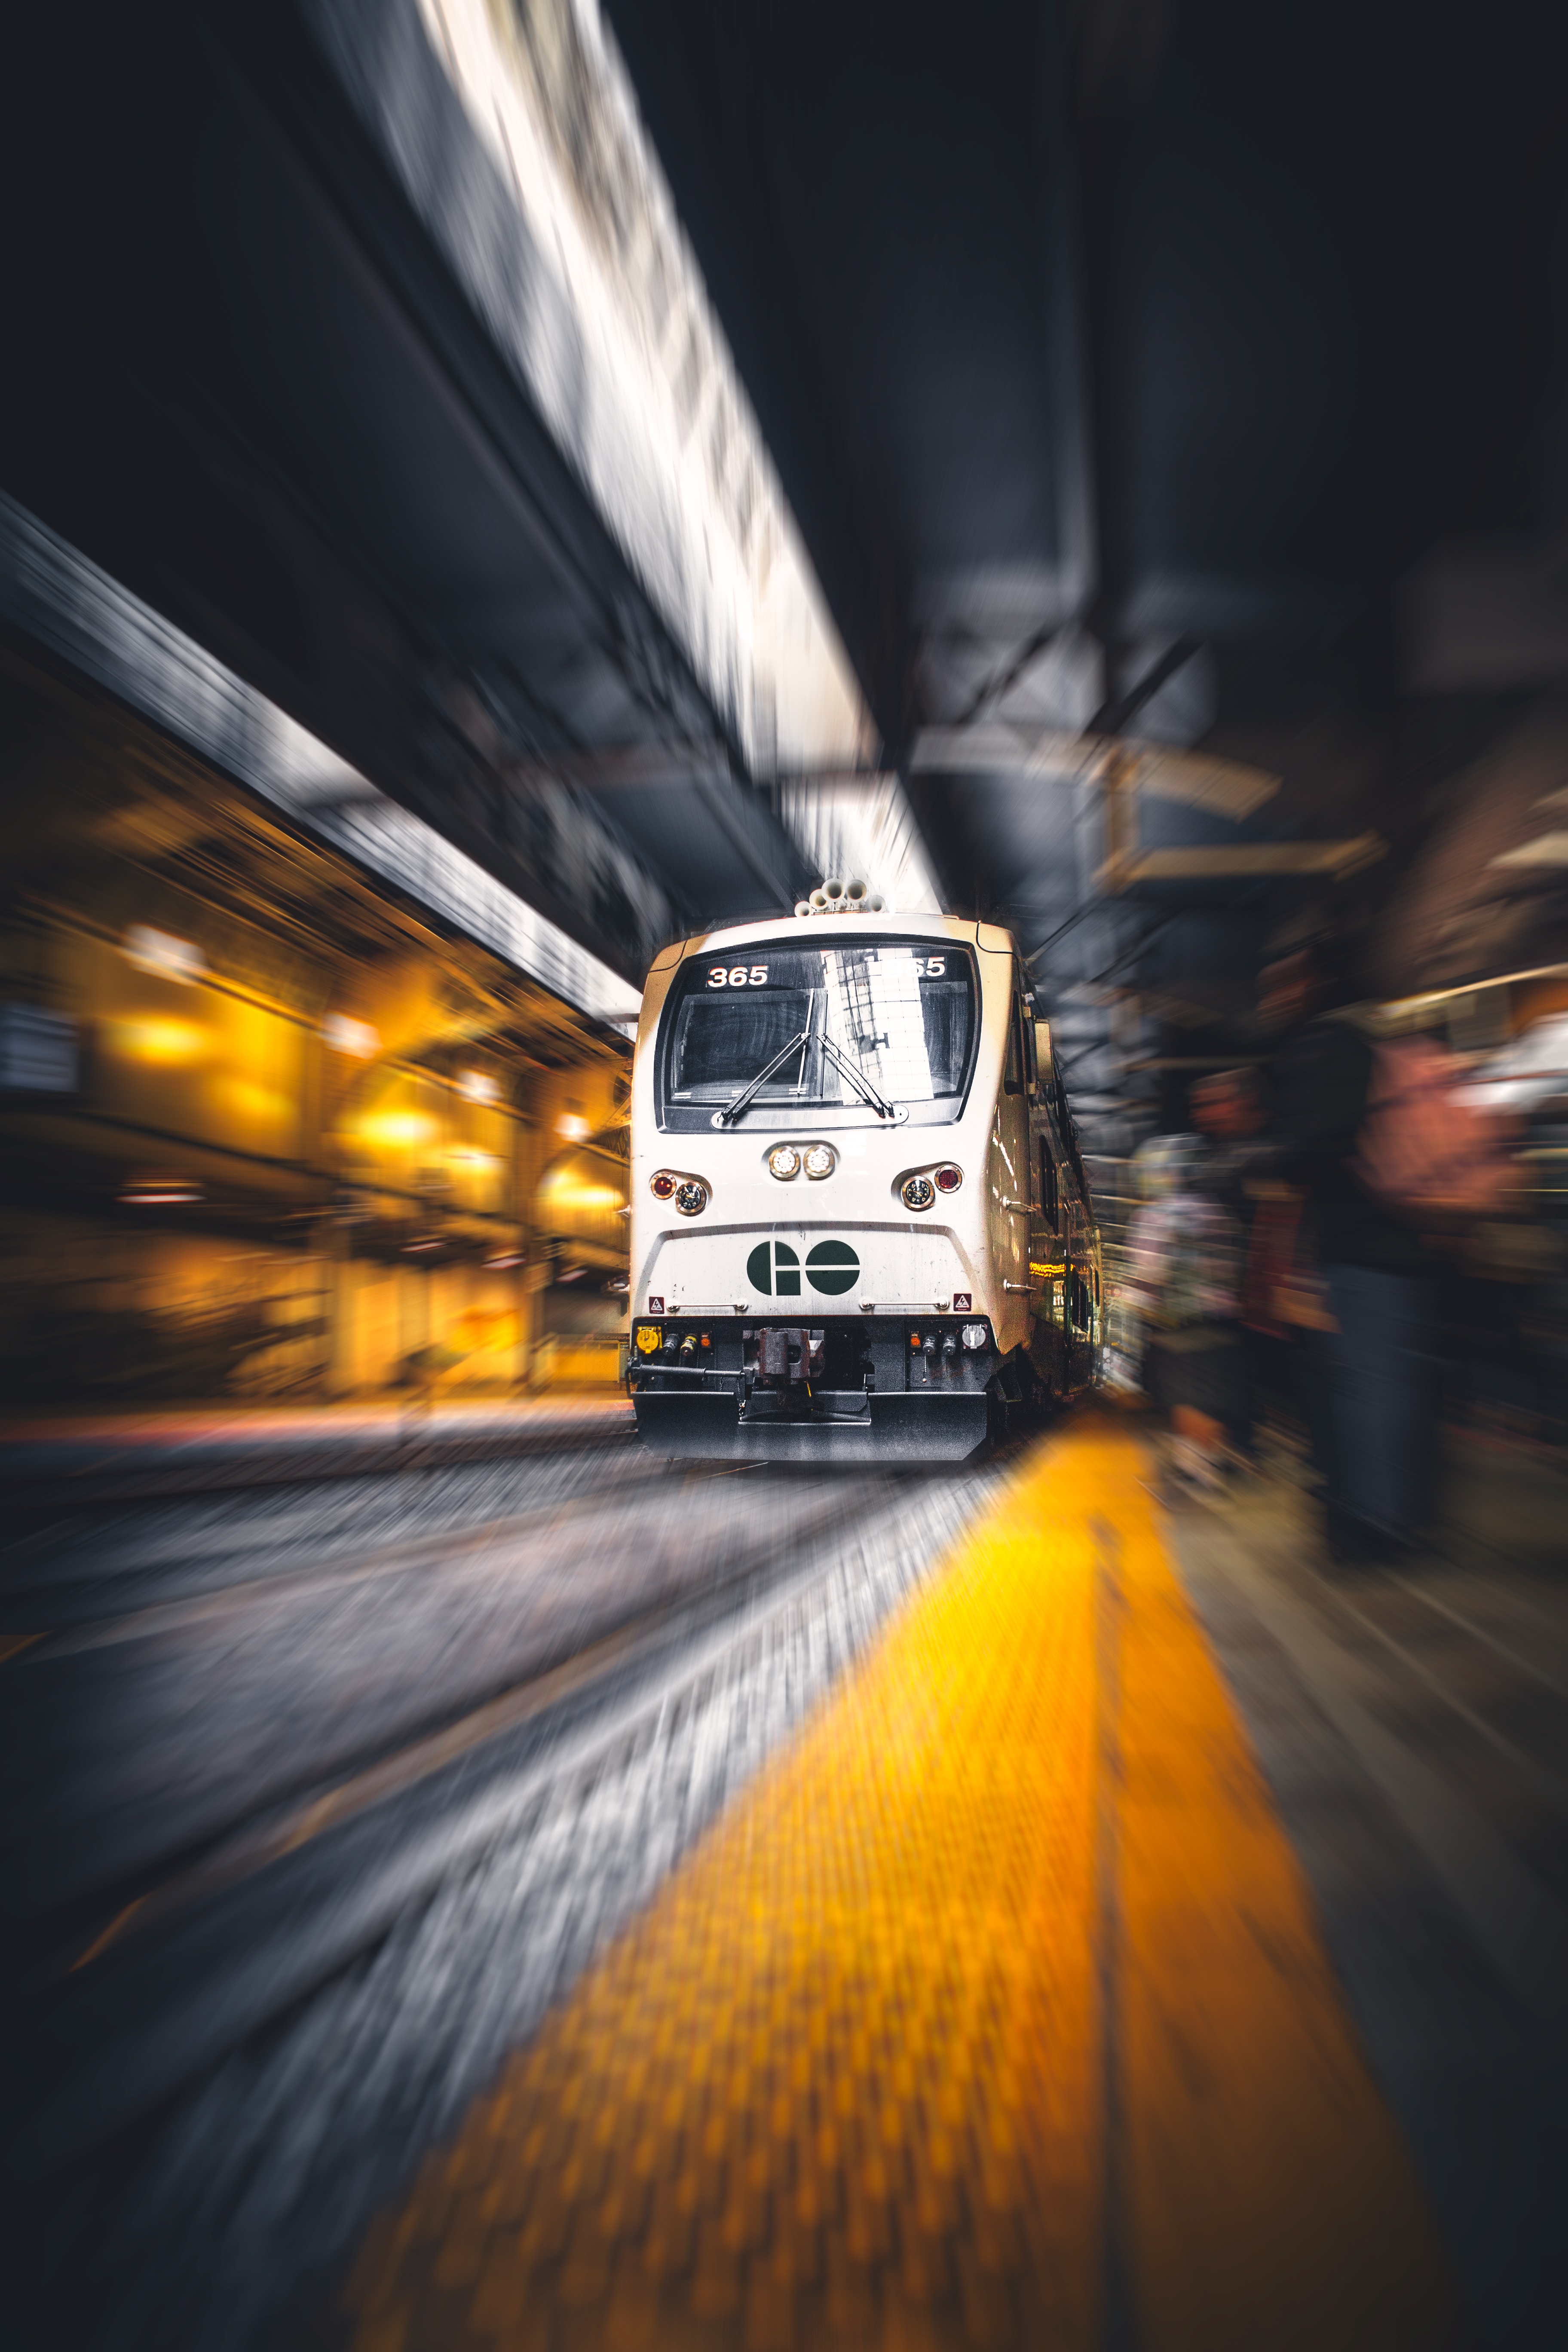 blur, miscellanea, miscellaneous, platform, traffic, movement, smooth, station, train wallpapers for tablet